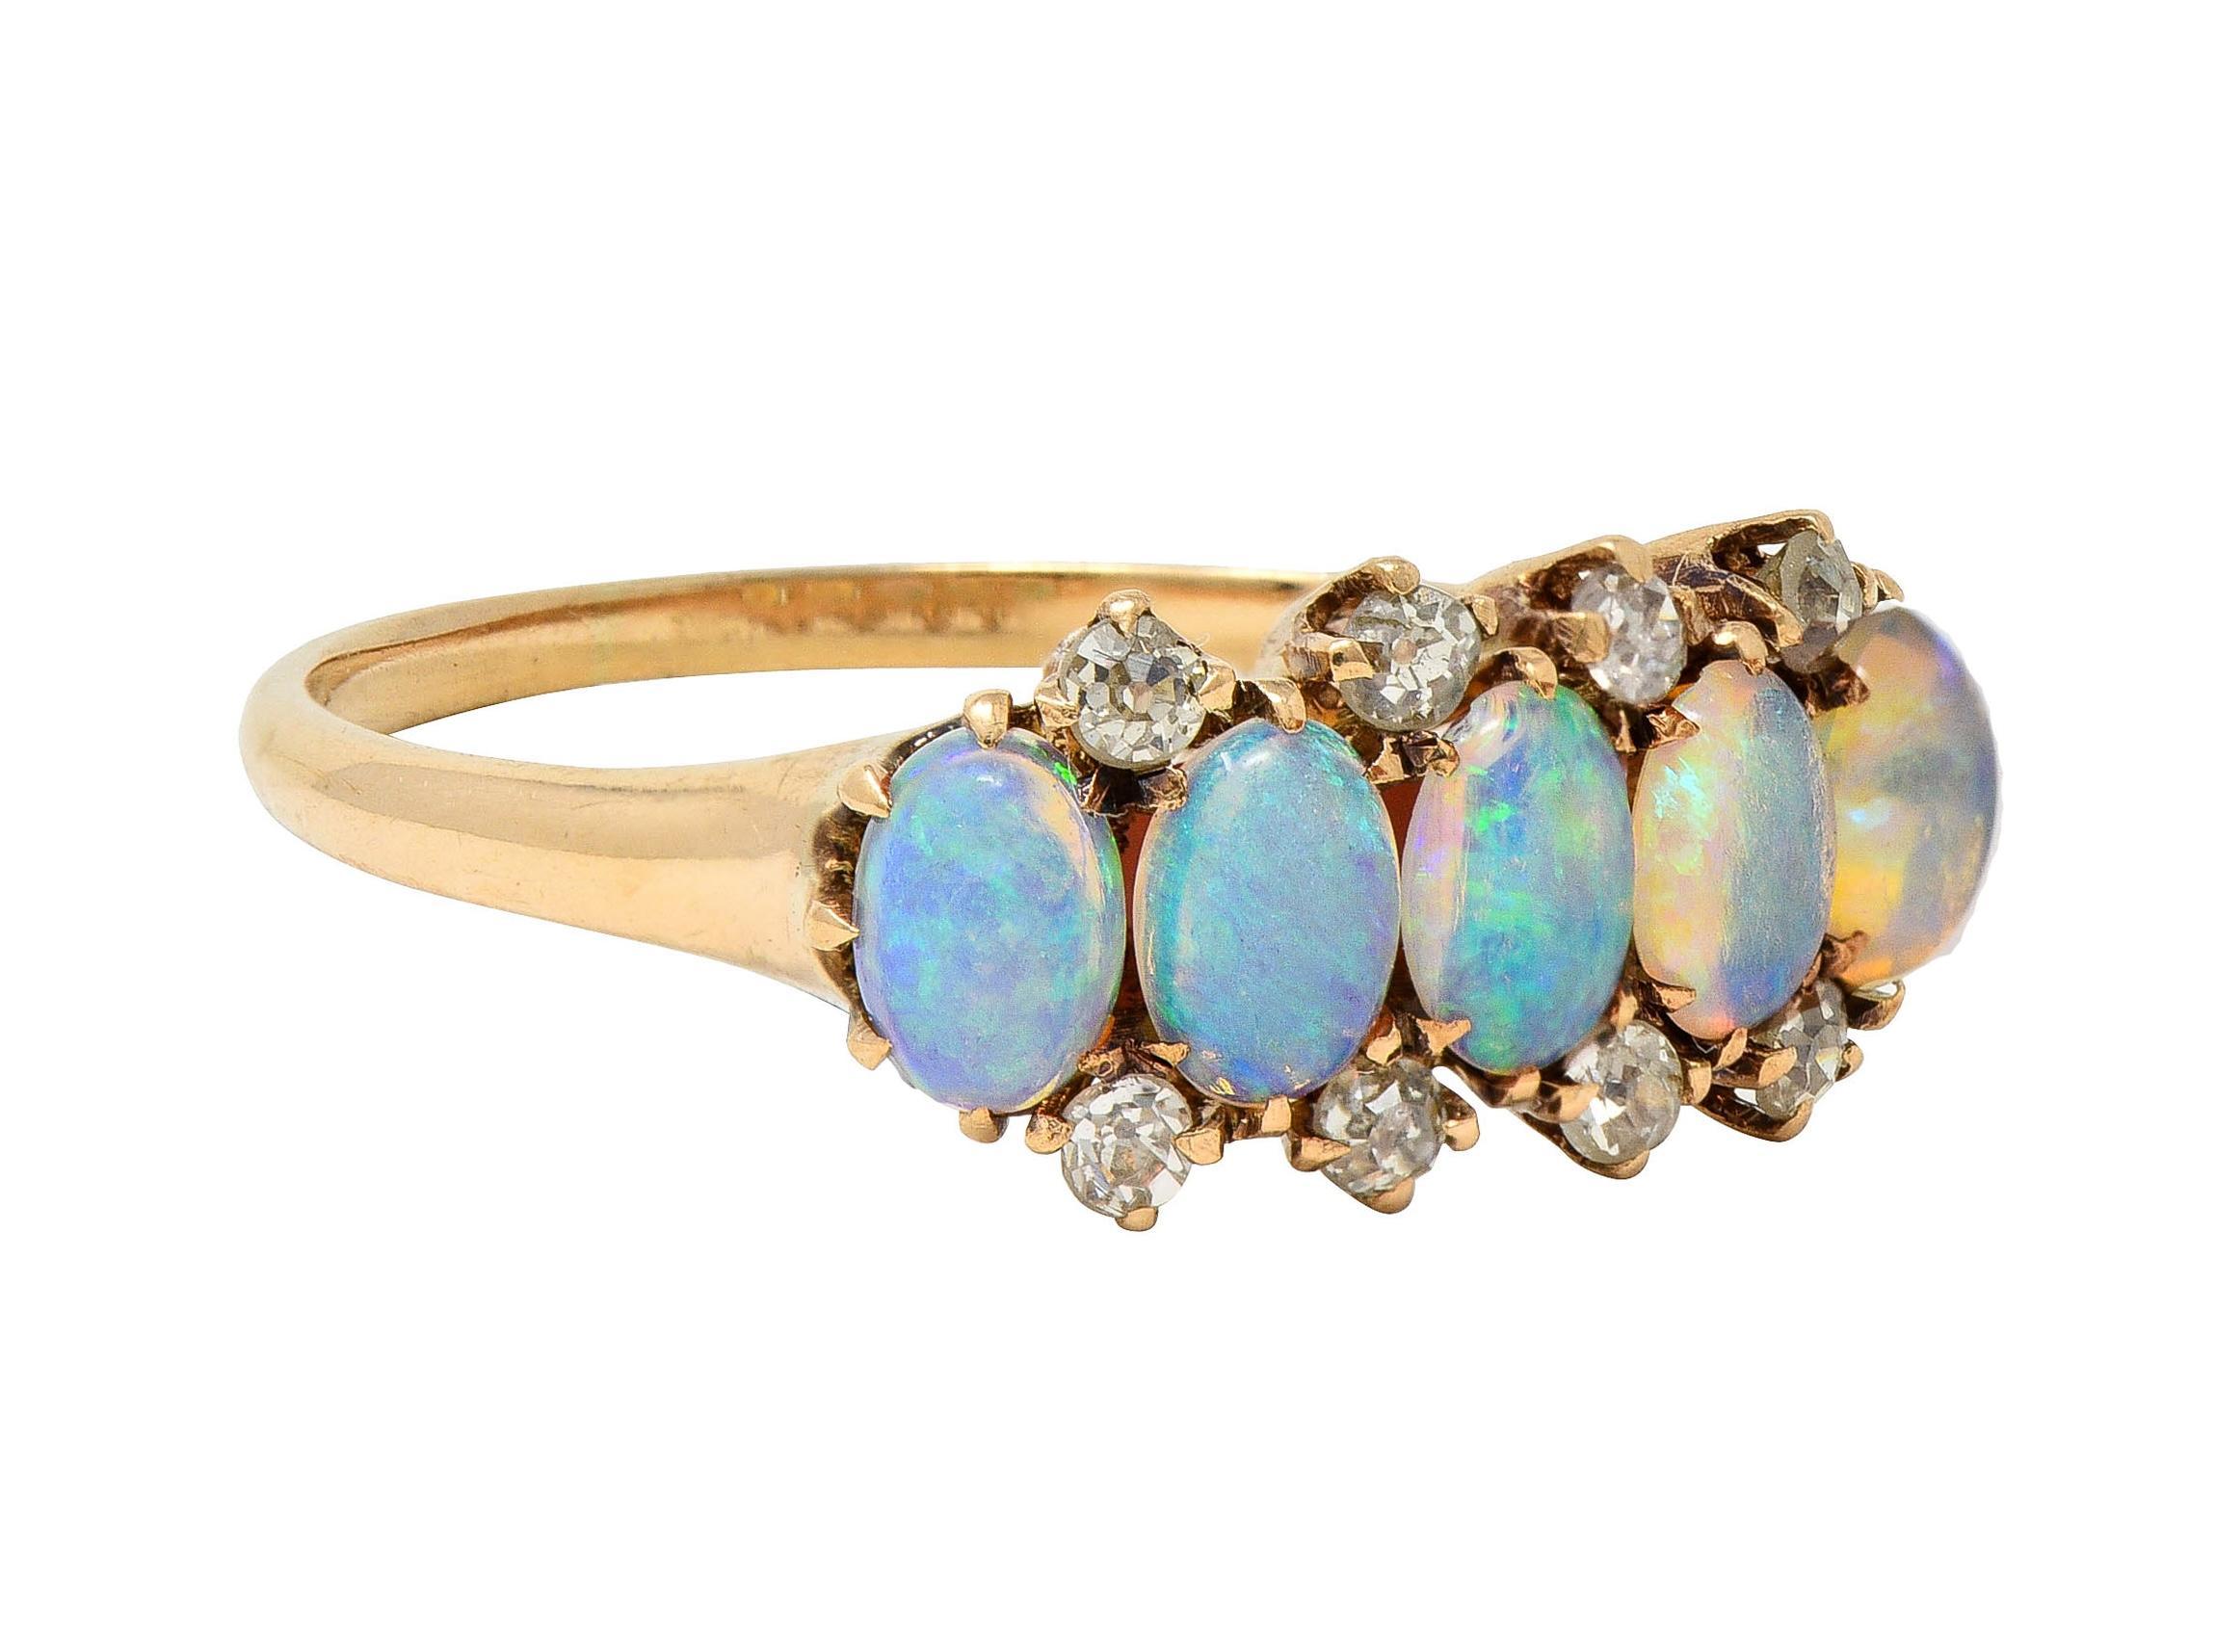 Featuring five oval-shaped opal cabochons, each measuring 3.0 x 4.5 mm
Translucent white in body color with spectral play-of-color - prong set in rows
Accented by rows of prong set old single cut diamonds
Weighing approximately 0.24 carat total -